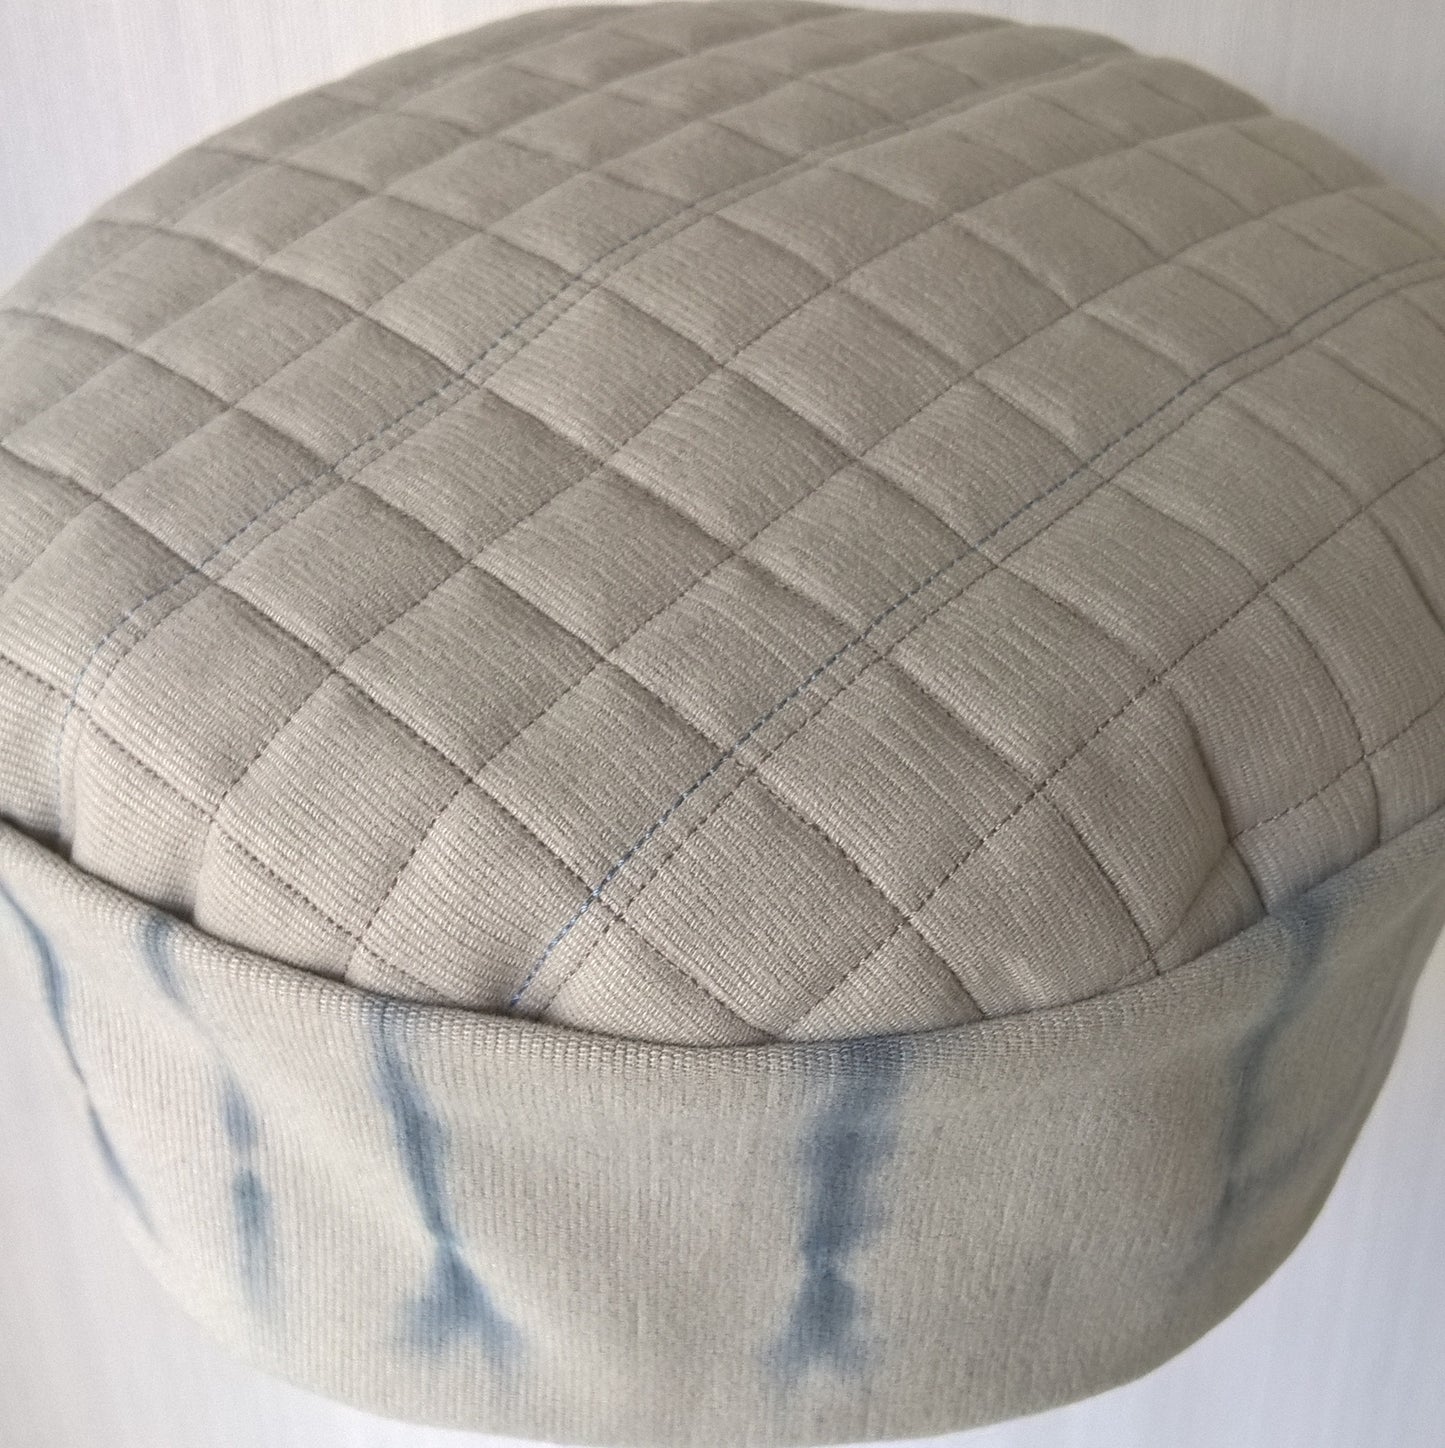 The tip is quilted in contrasting colours of taupe and blue